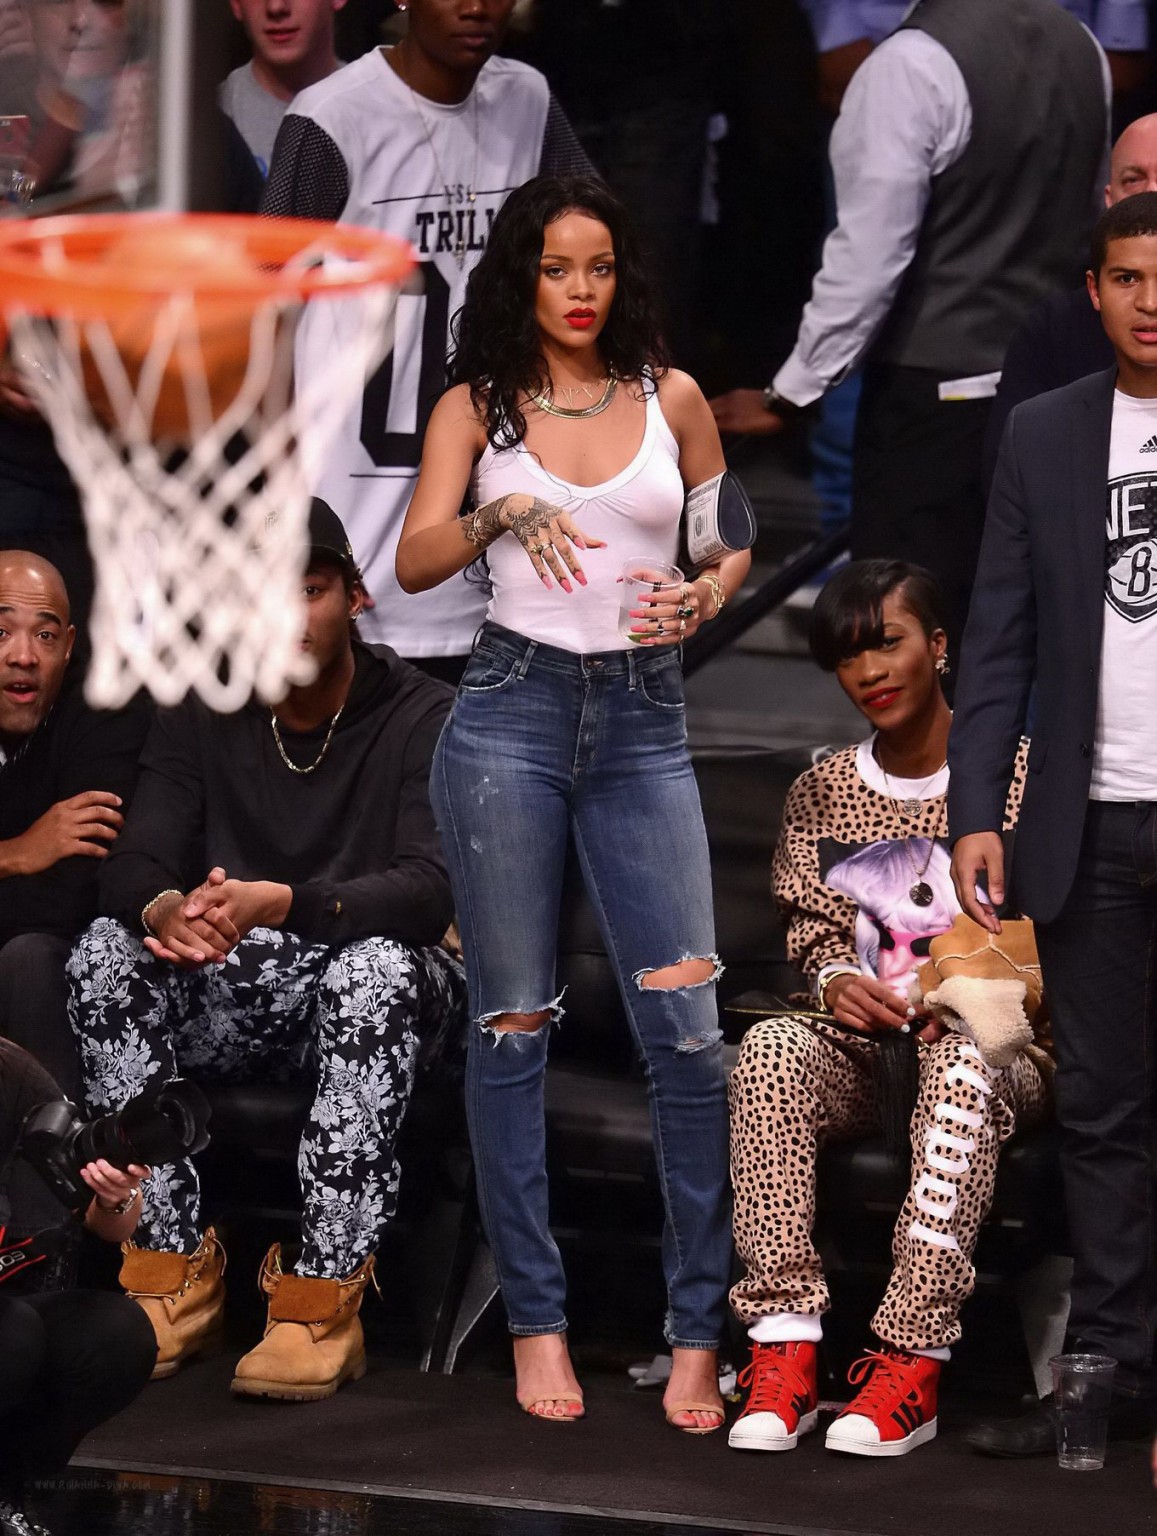 Rihanna shows off her boobs in seethru top at a basketball game in NYC #75198035